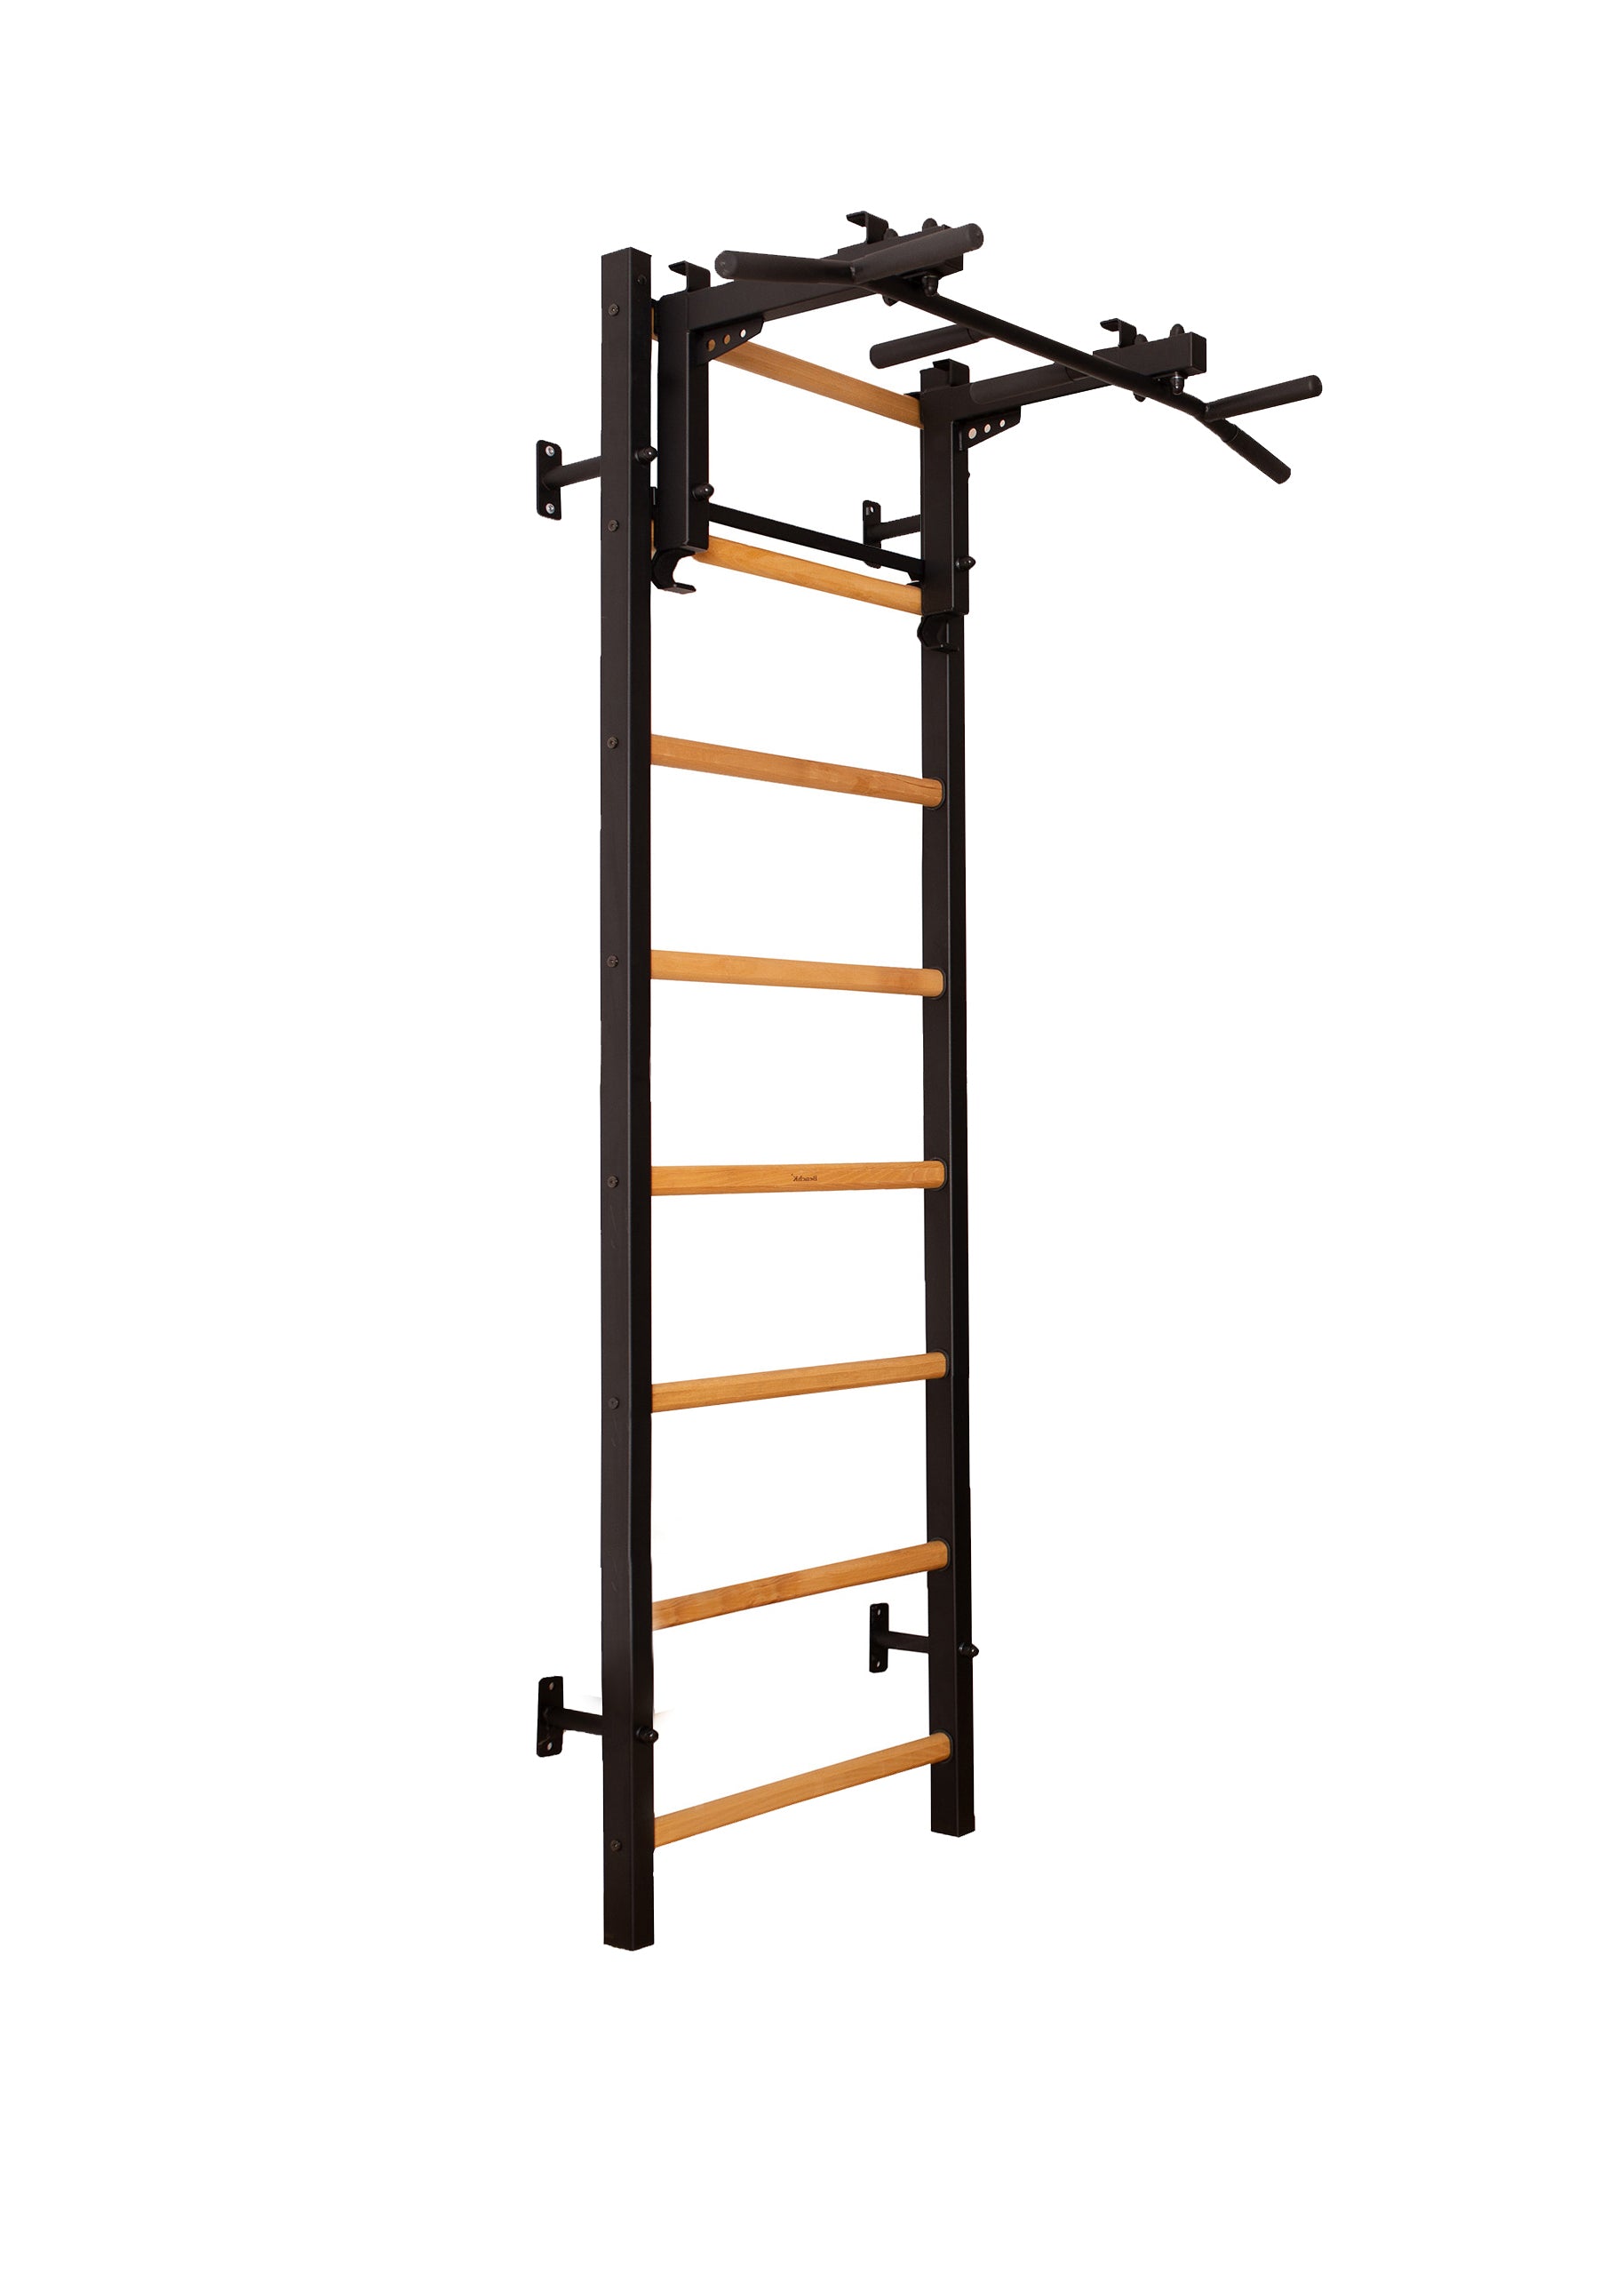 BenchK 231 Wall Bars with Convertible Pull Up Bar Swedish Ladder Home Gym Equipment